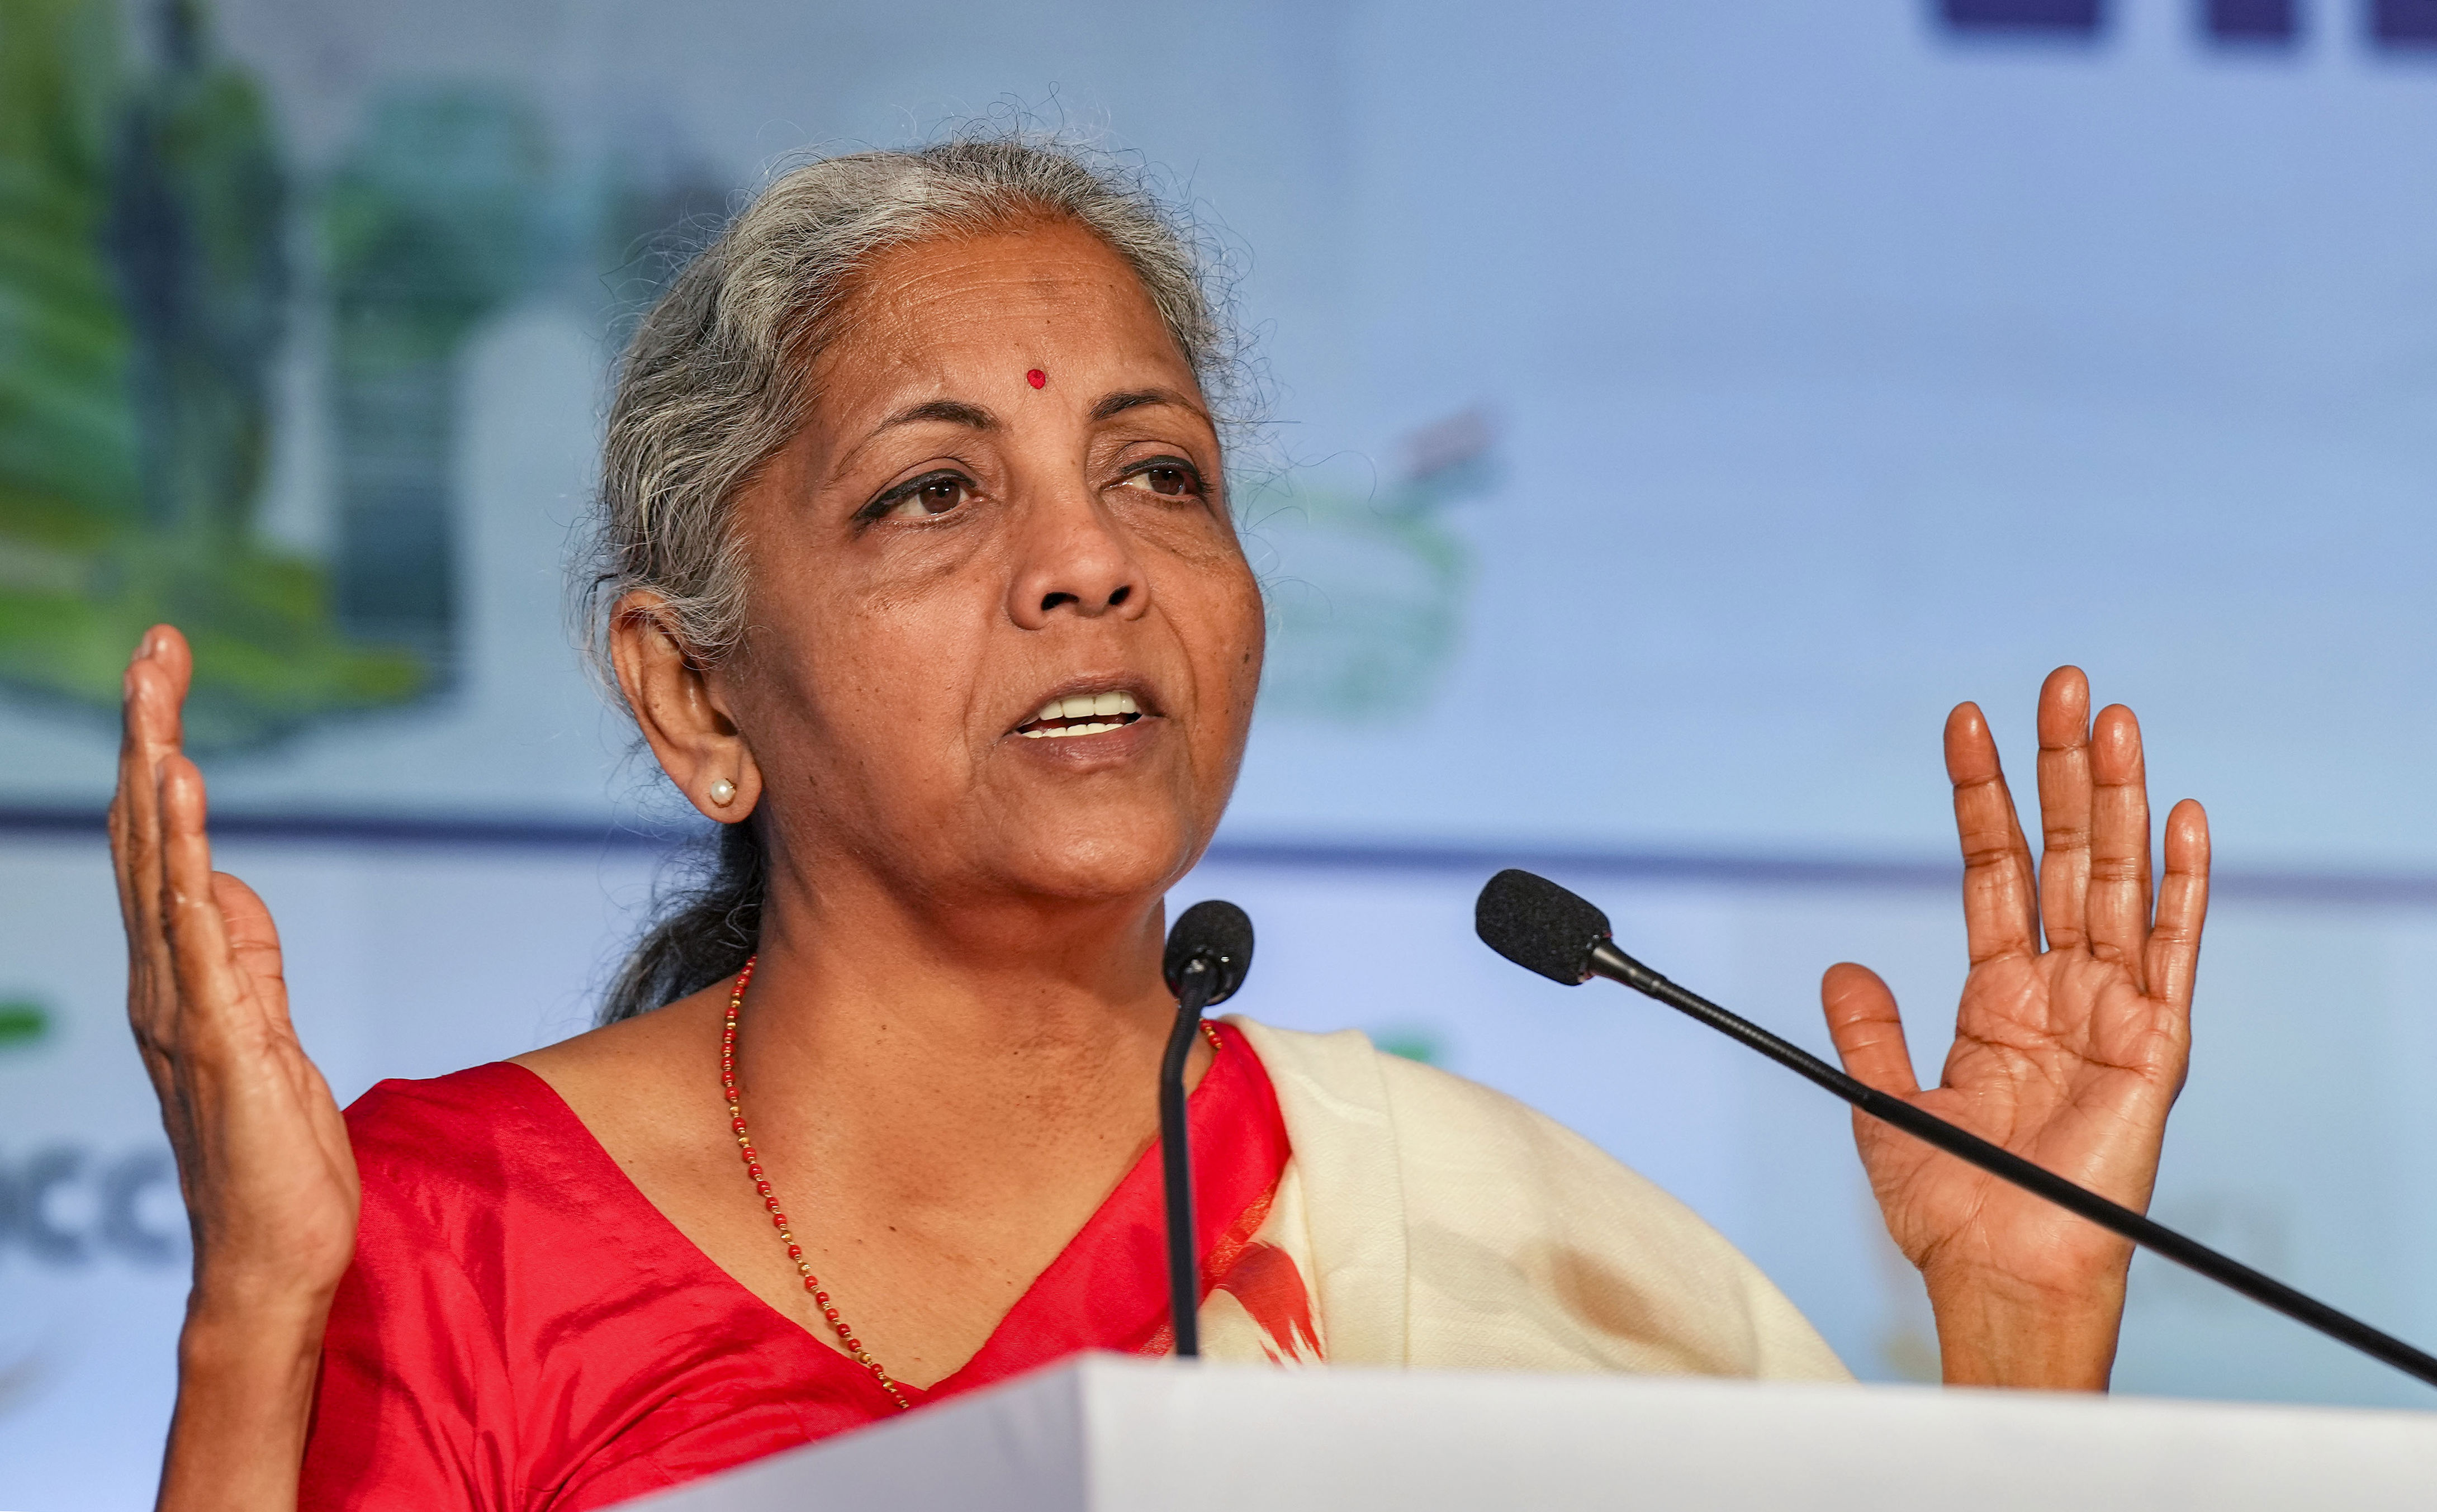 sitharaman confident of india inc aligning to country's developmental goals